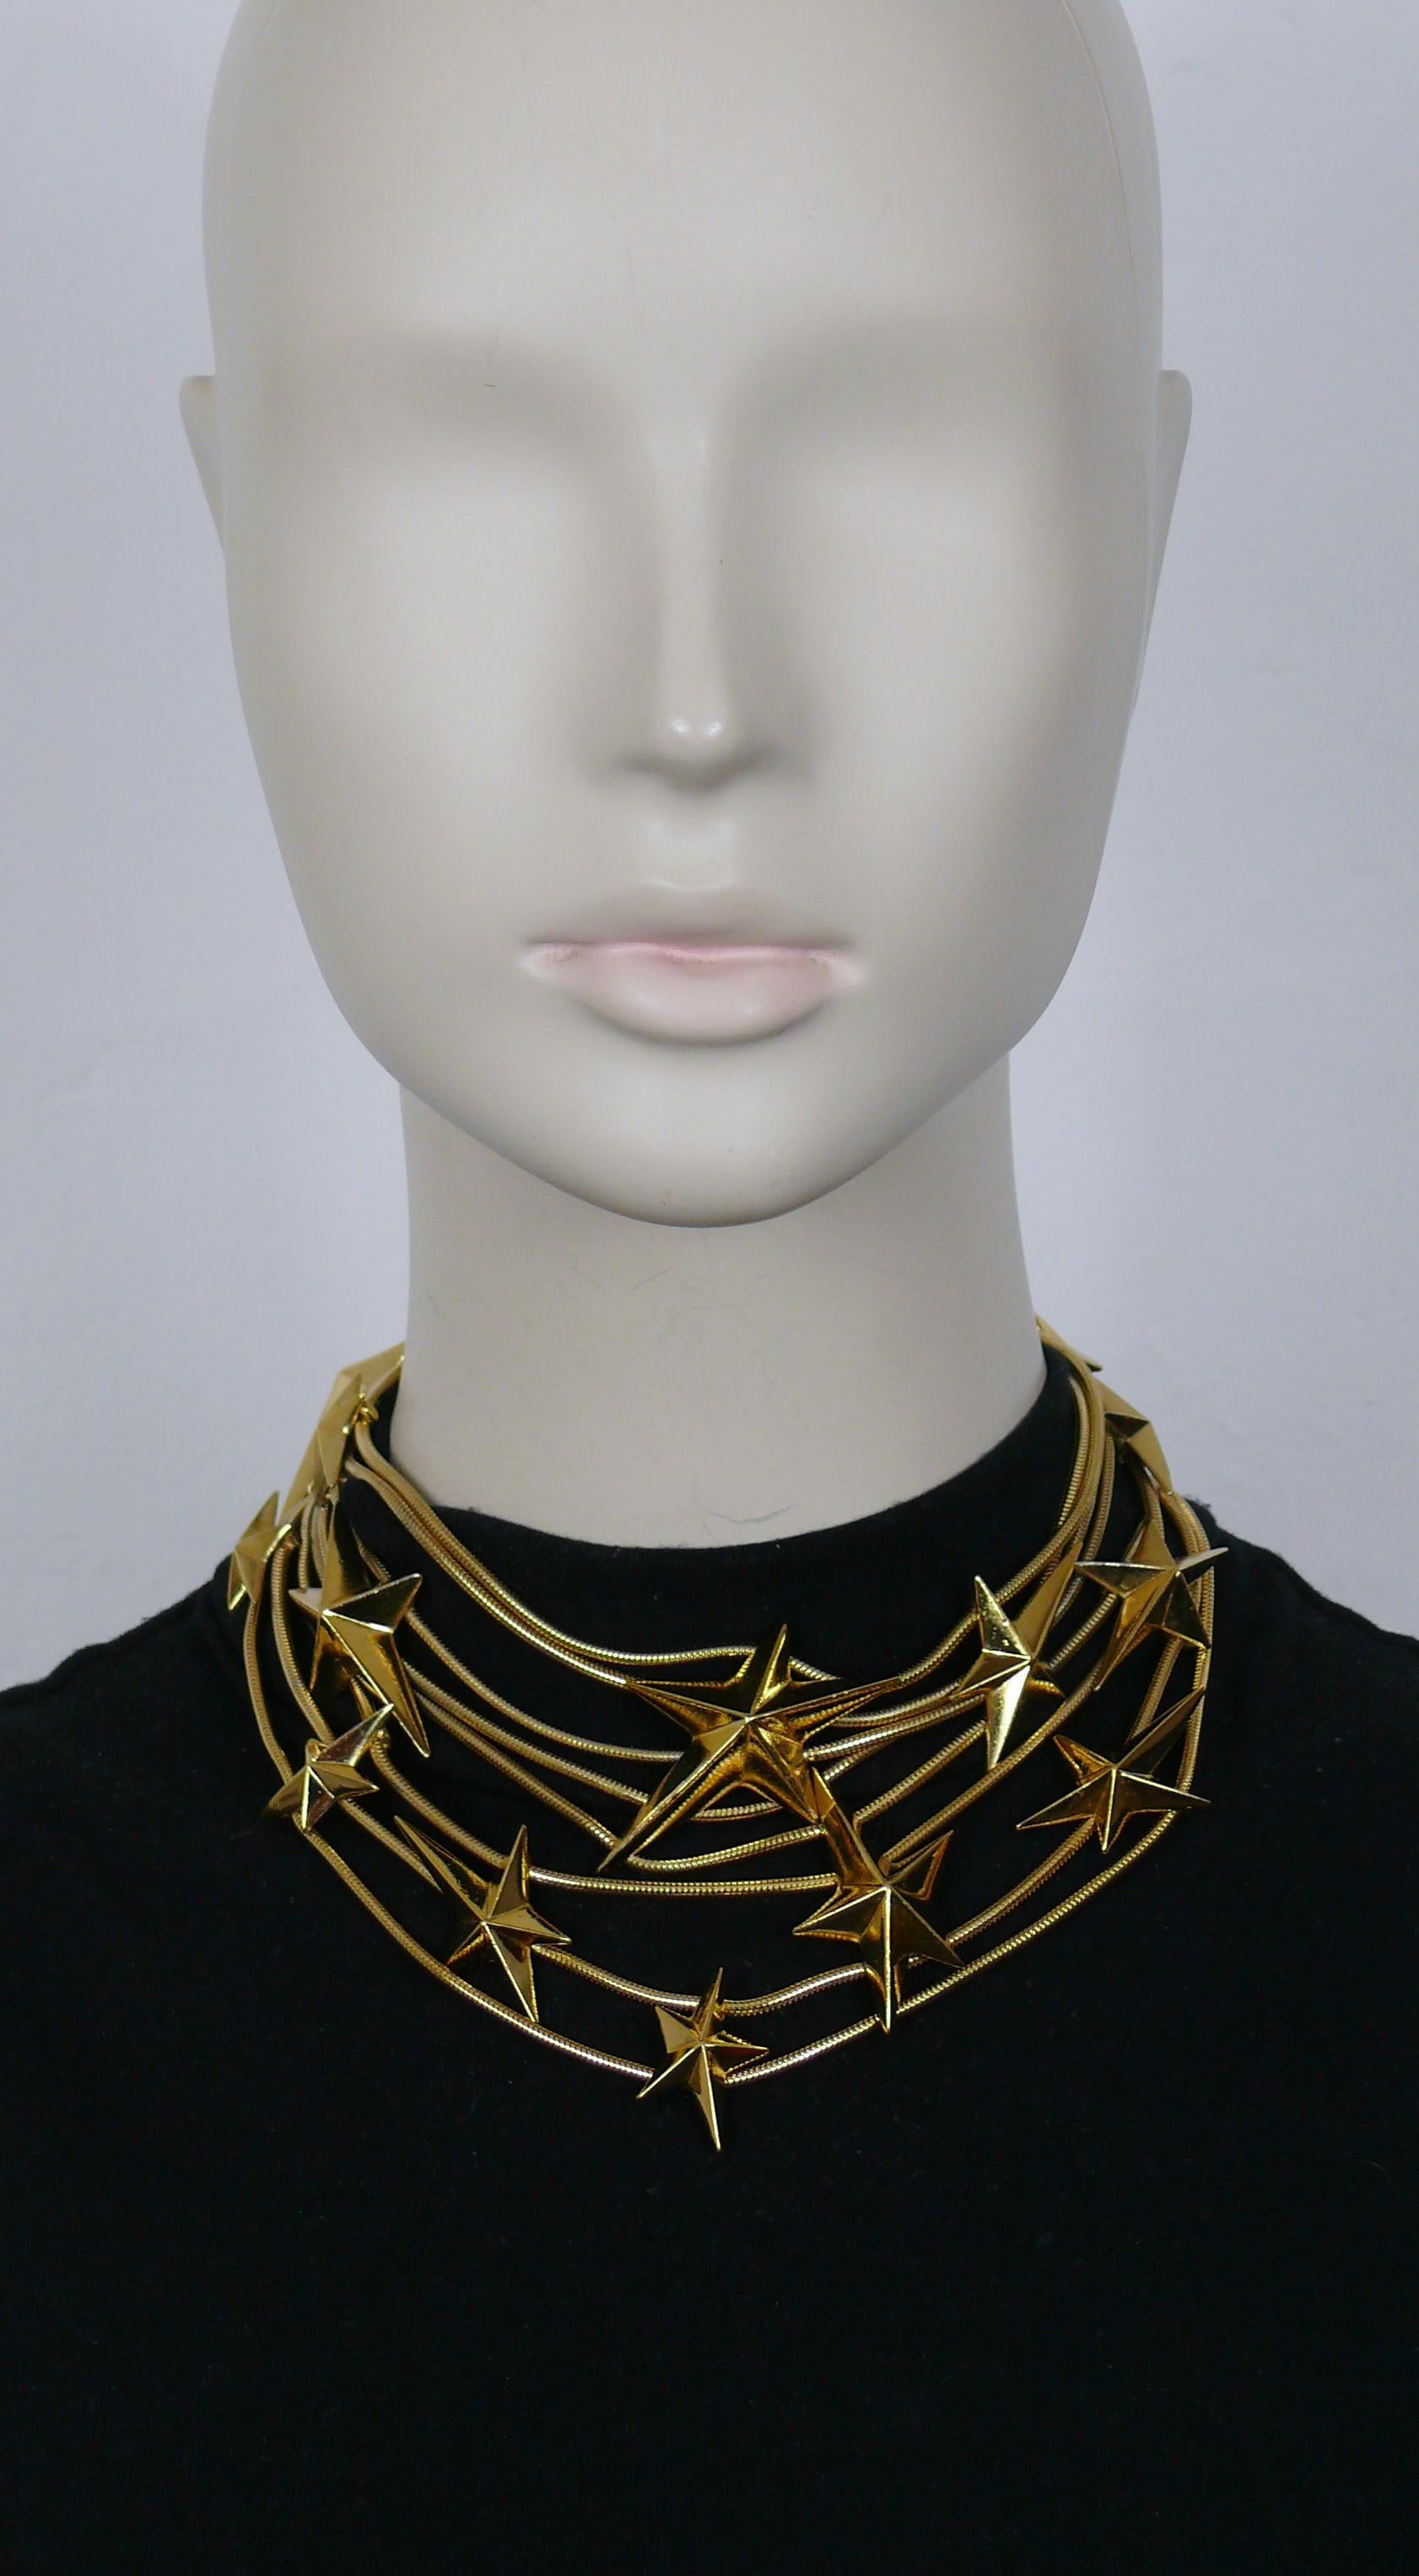 THIERRY MUGLER vintage gold tone multi strand snake chains choker necklace embellished with THIERRY MUGLER's iconic stars.

Adjustable T-bar and toggle closure.

Embossed THIERRY MUGLER and TM.

Indicative measurements : adjustable length from